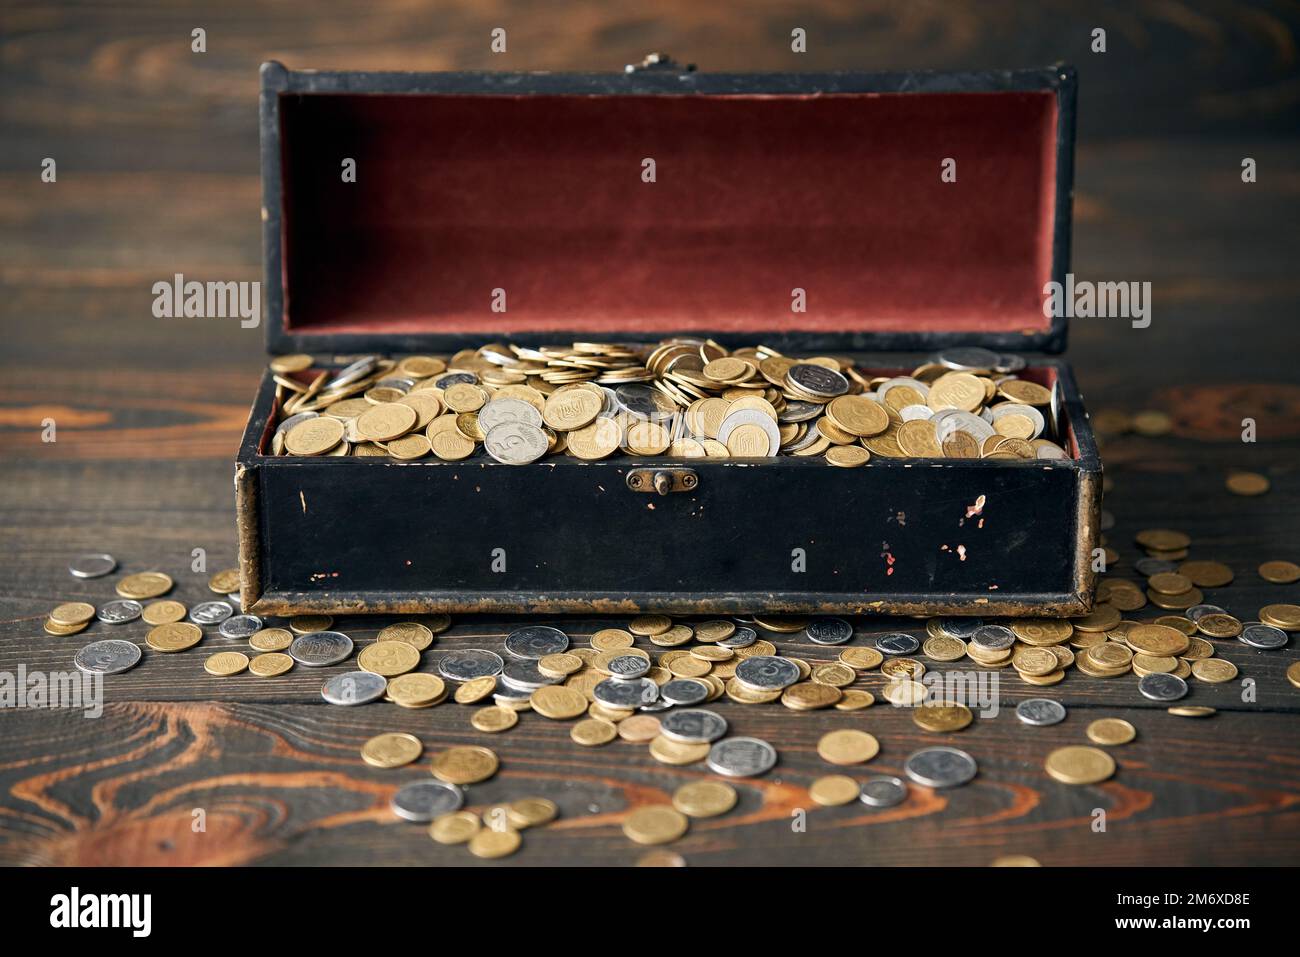 An overflowing treasure chest filled with gold coins -- antique